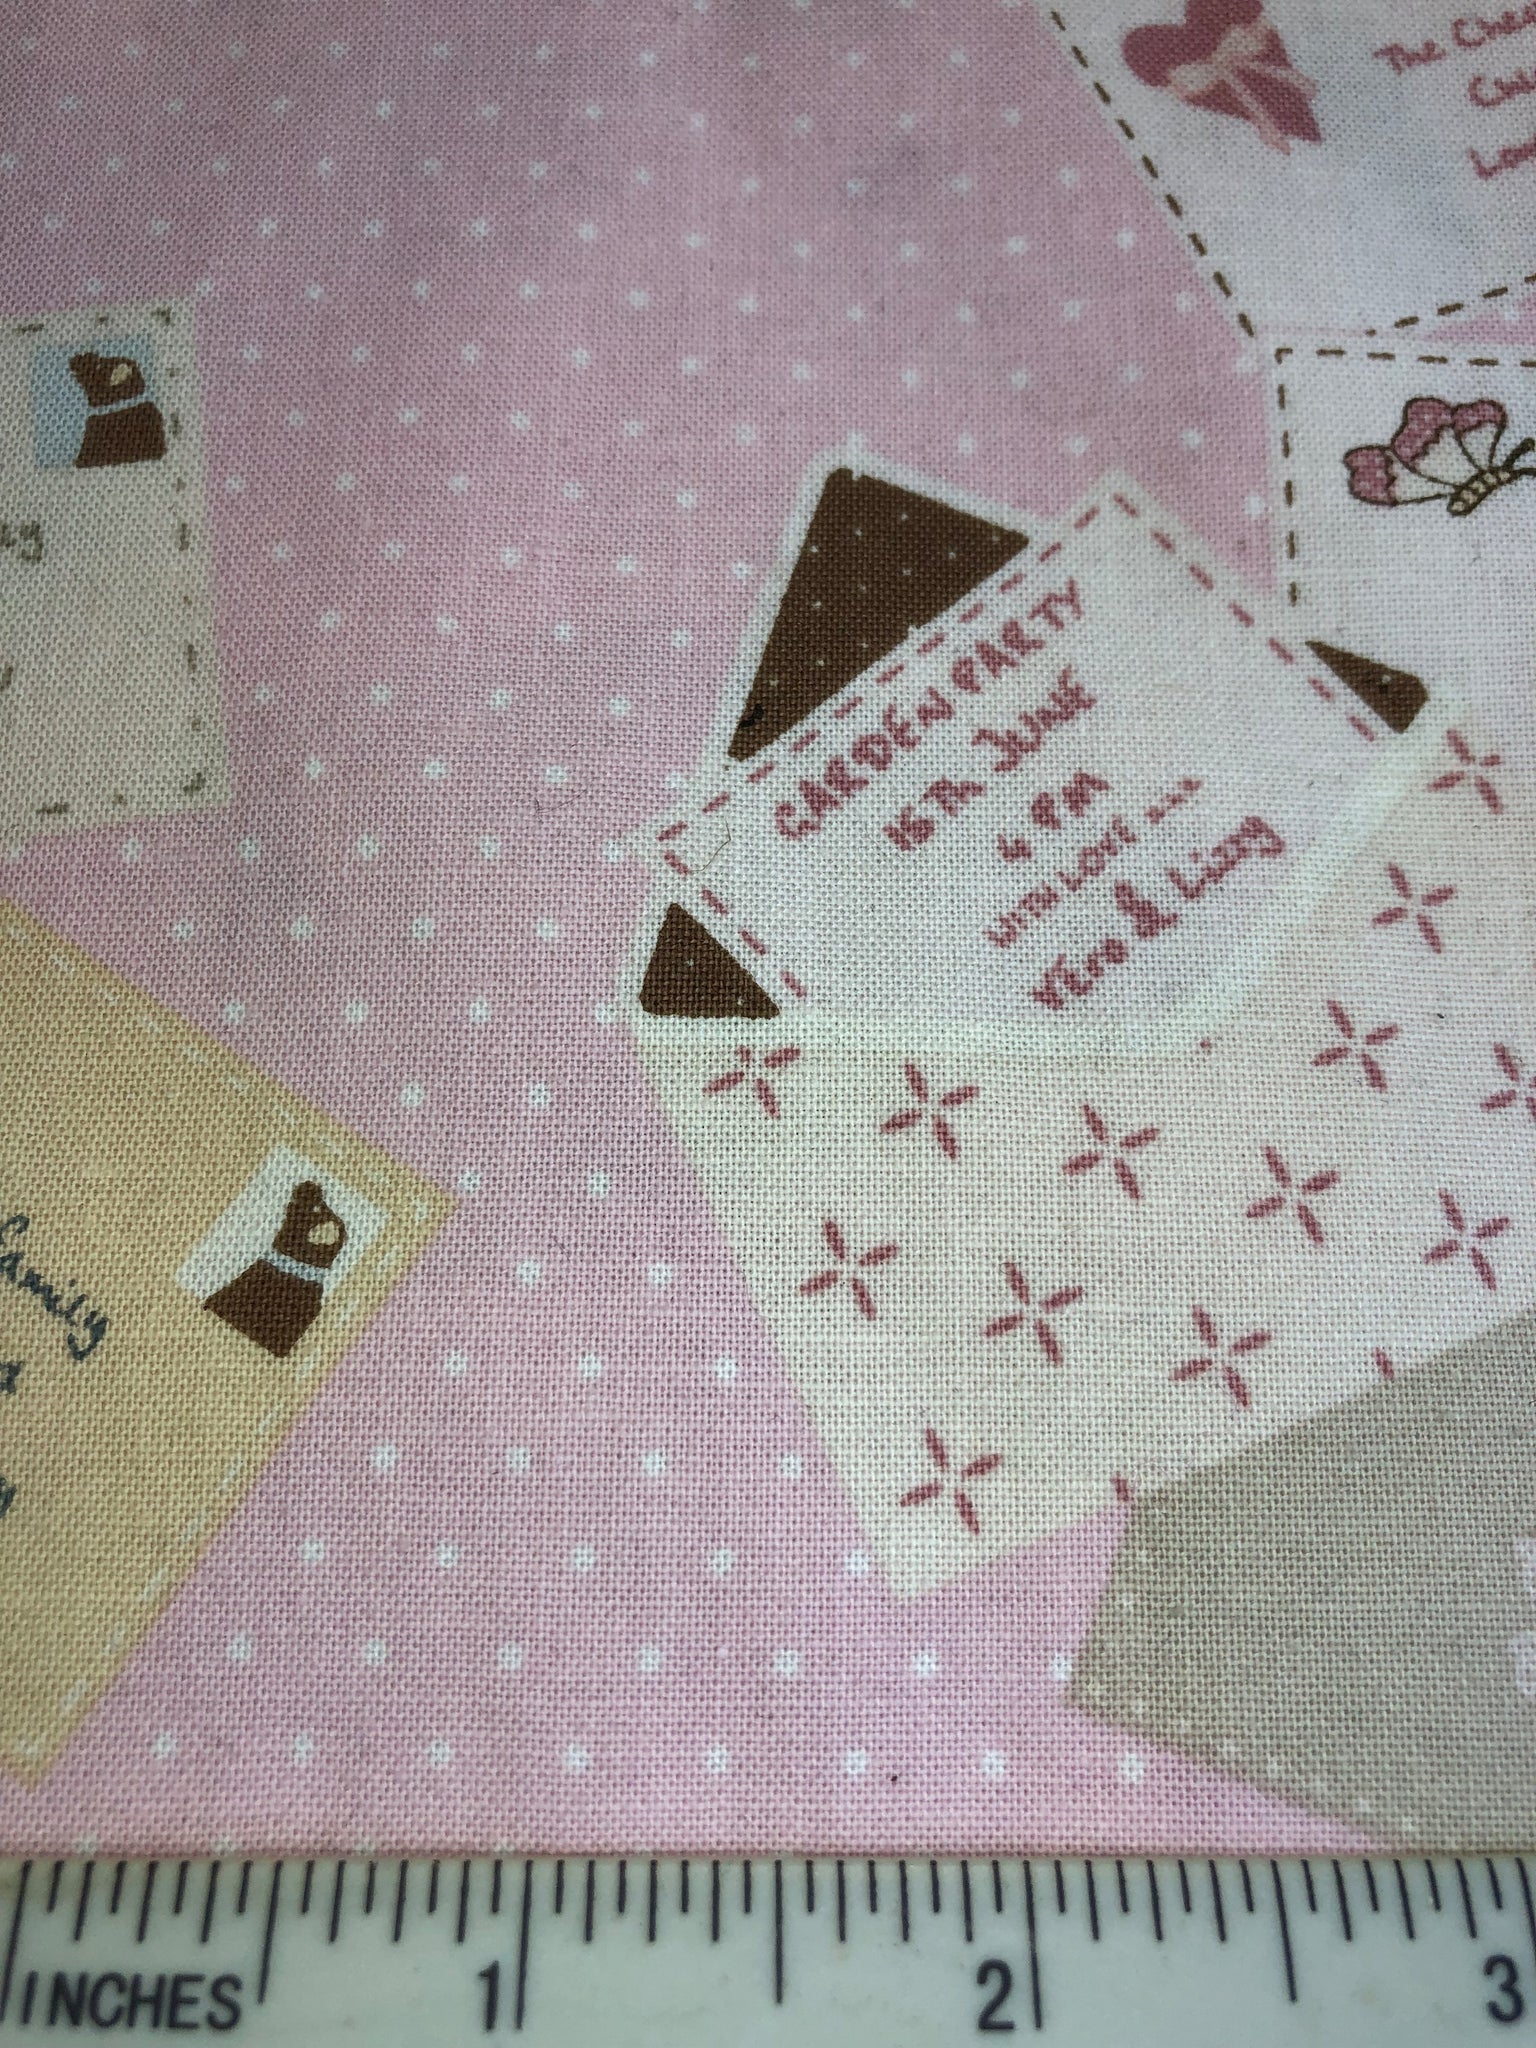 Vero's World - FS485- Pink background with White polka dots and scattered envelopes